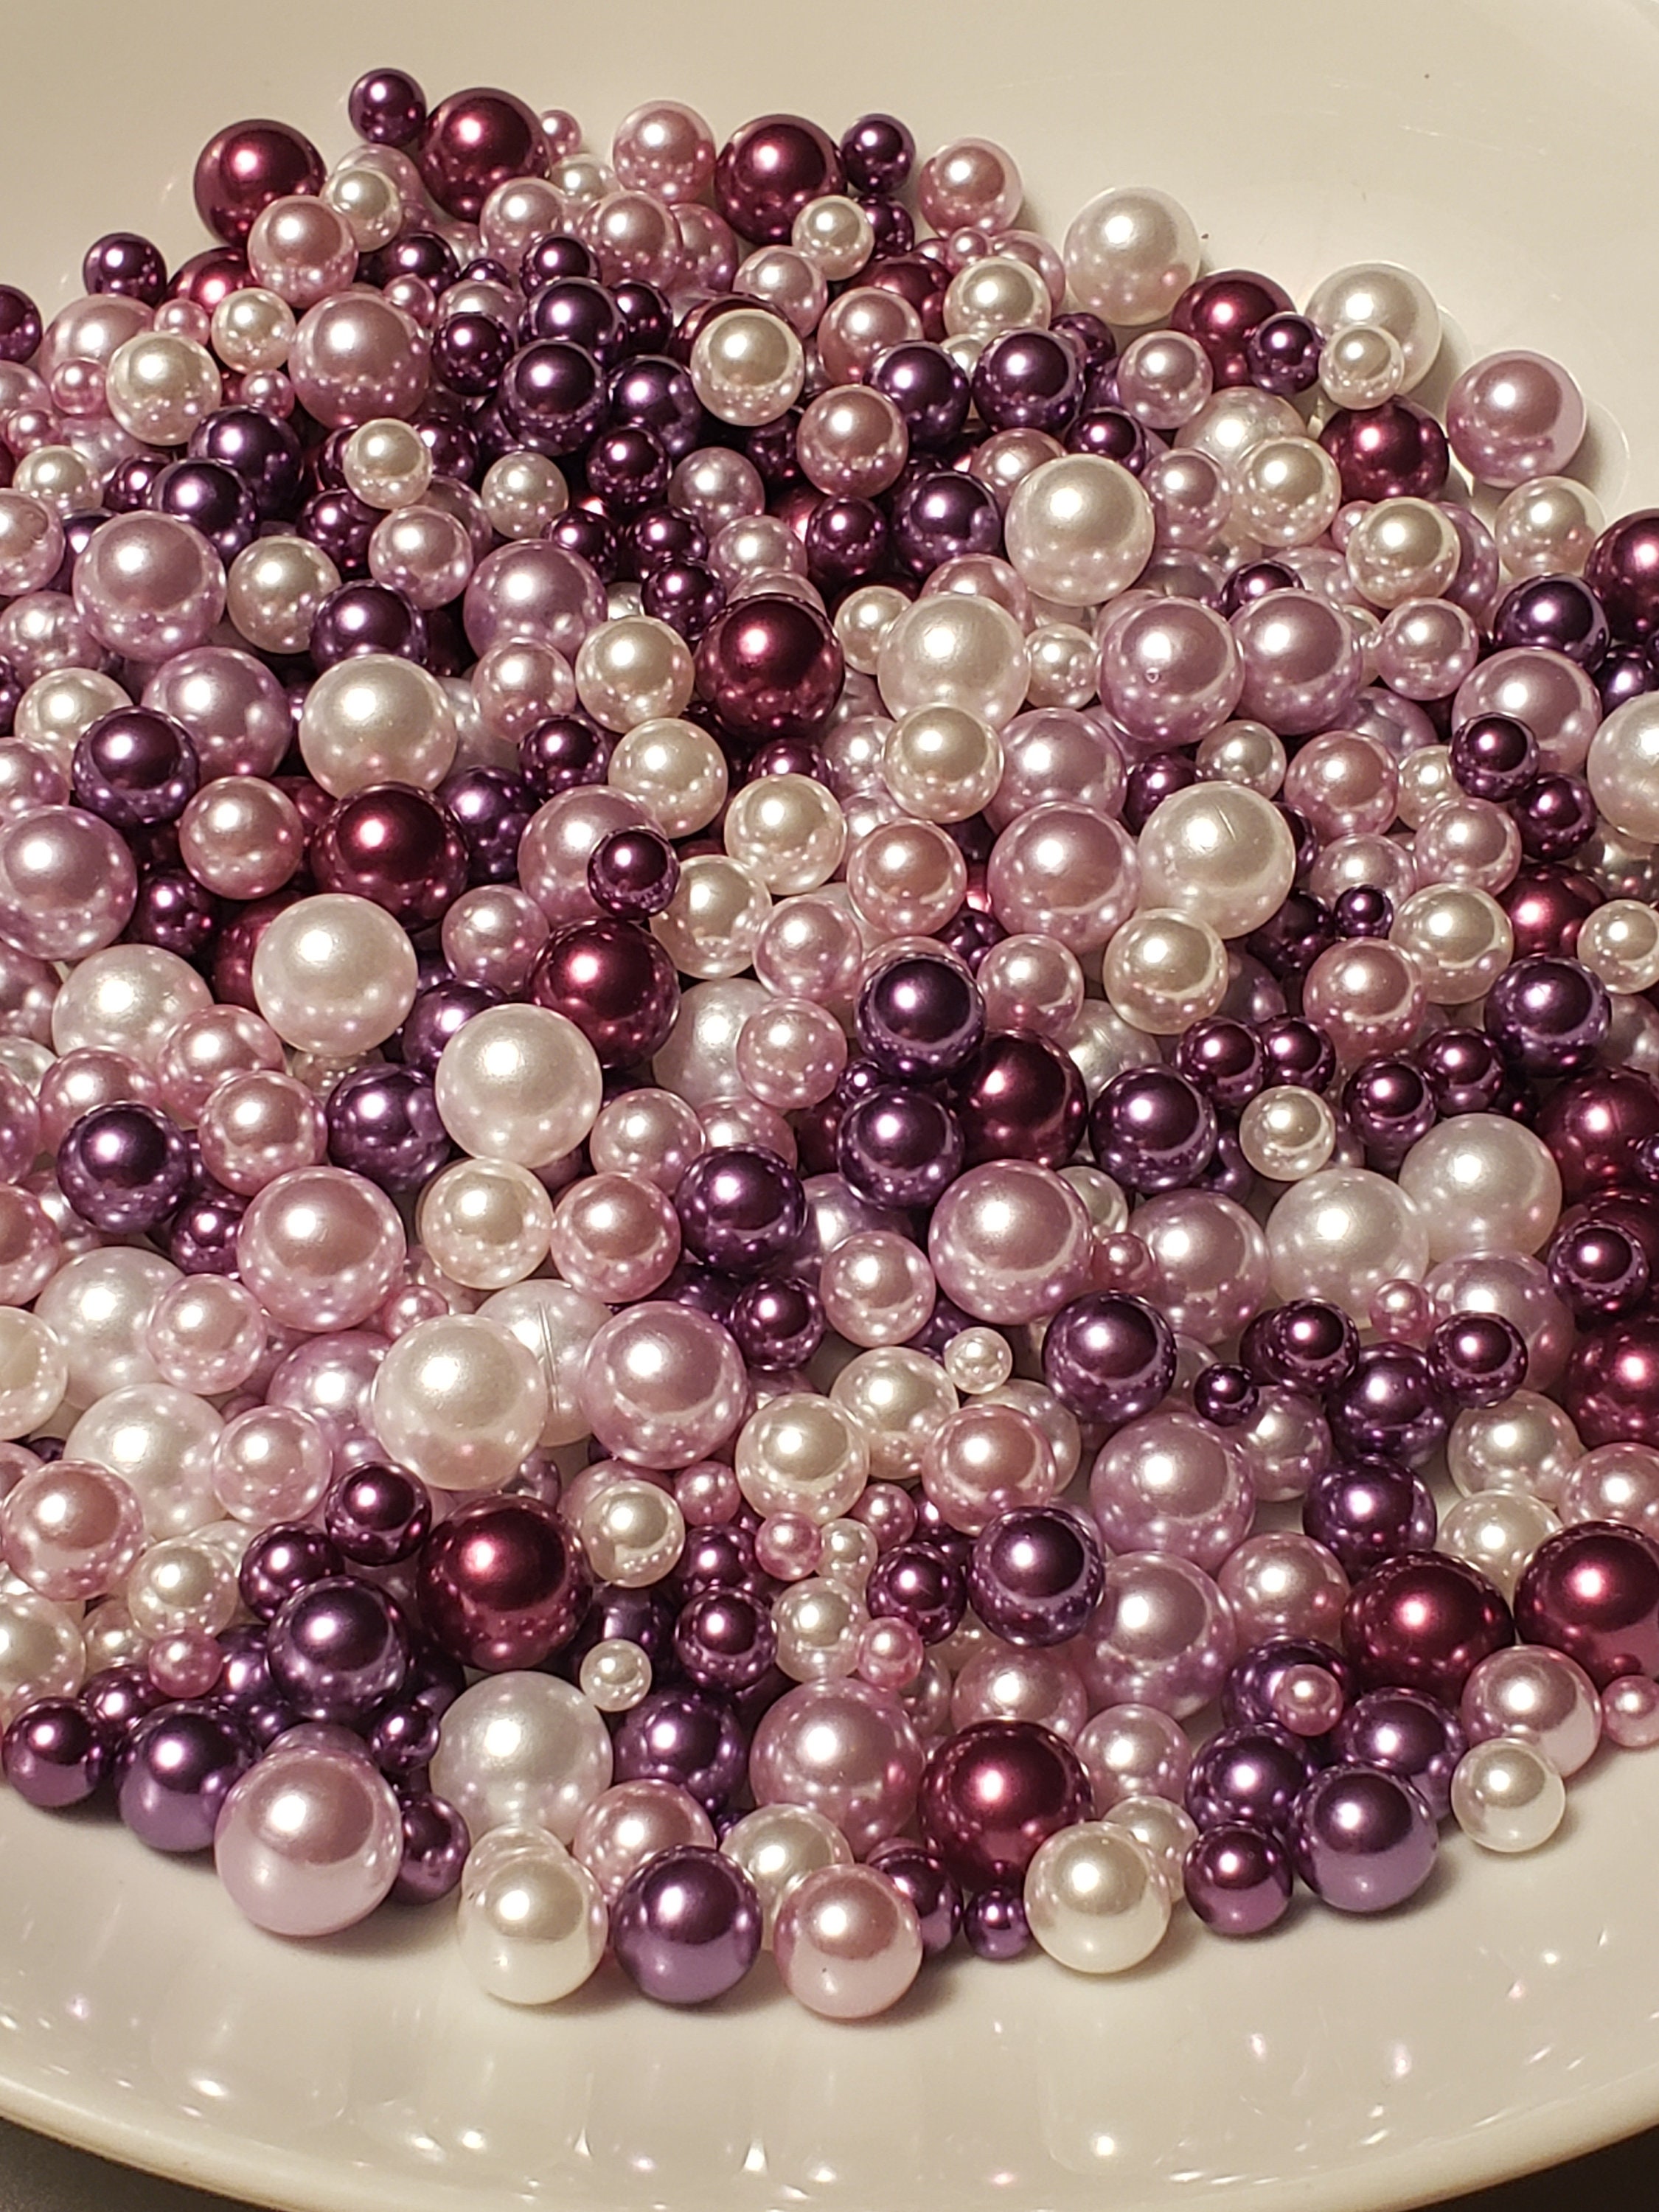 Bright Purple and White Striped Beads, Chunky Bead Mix for Jewelry